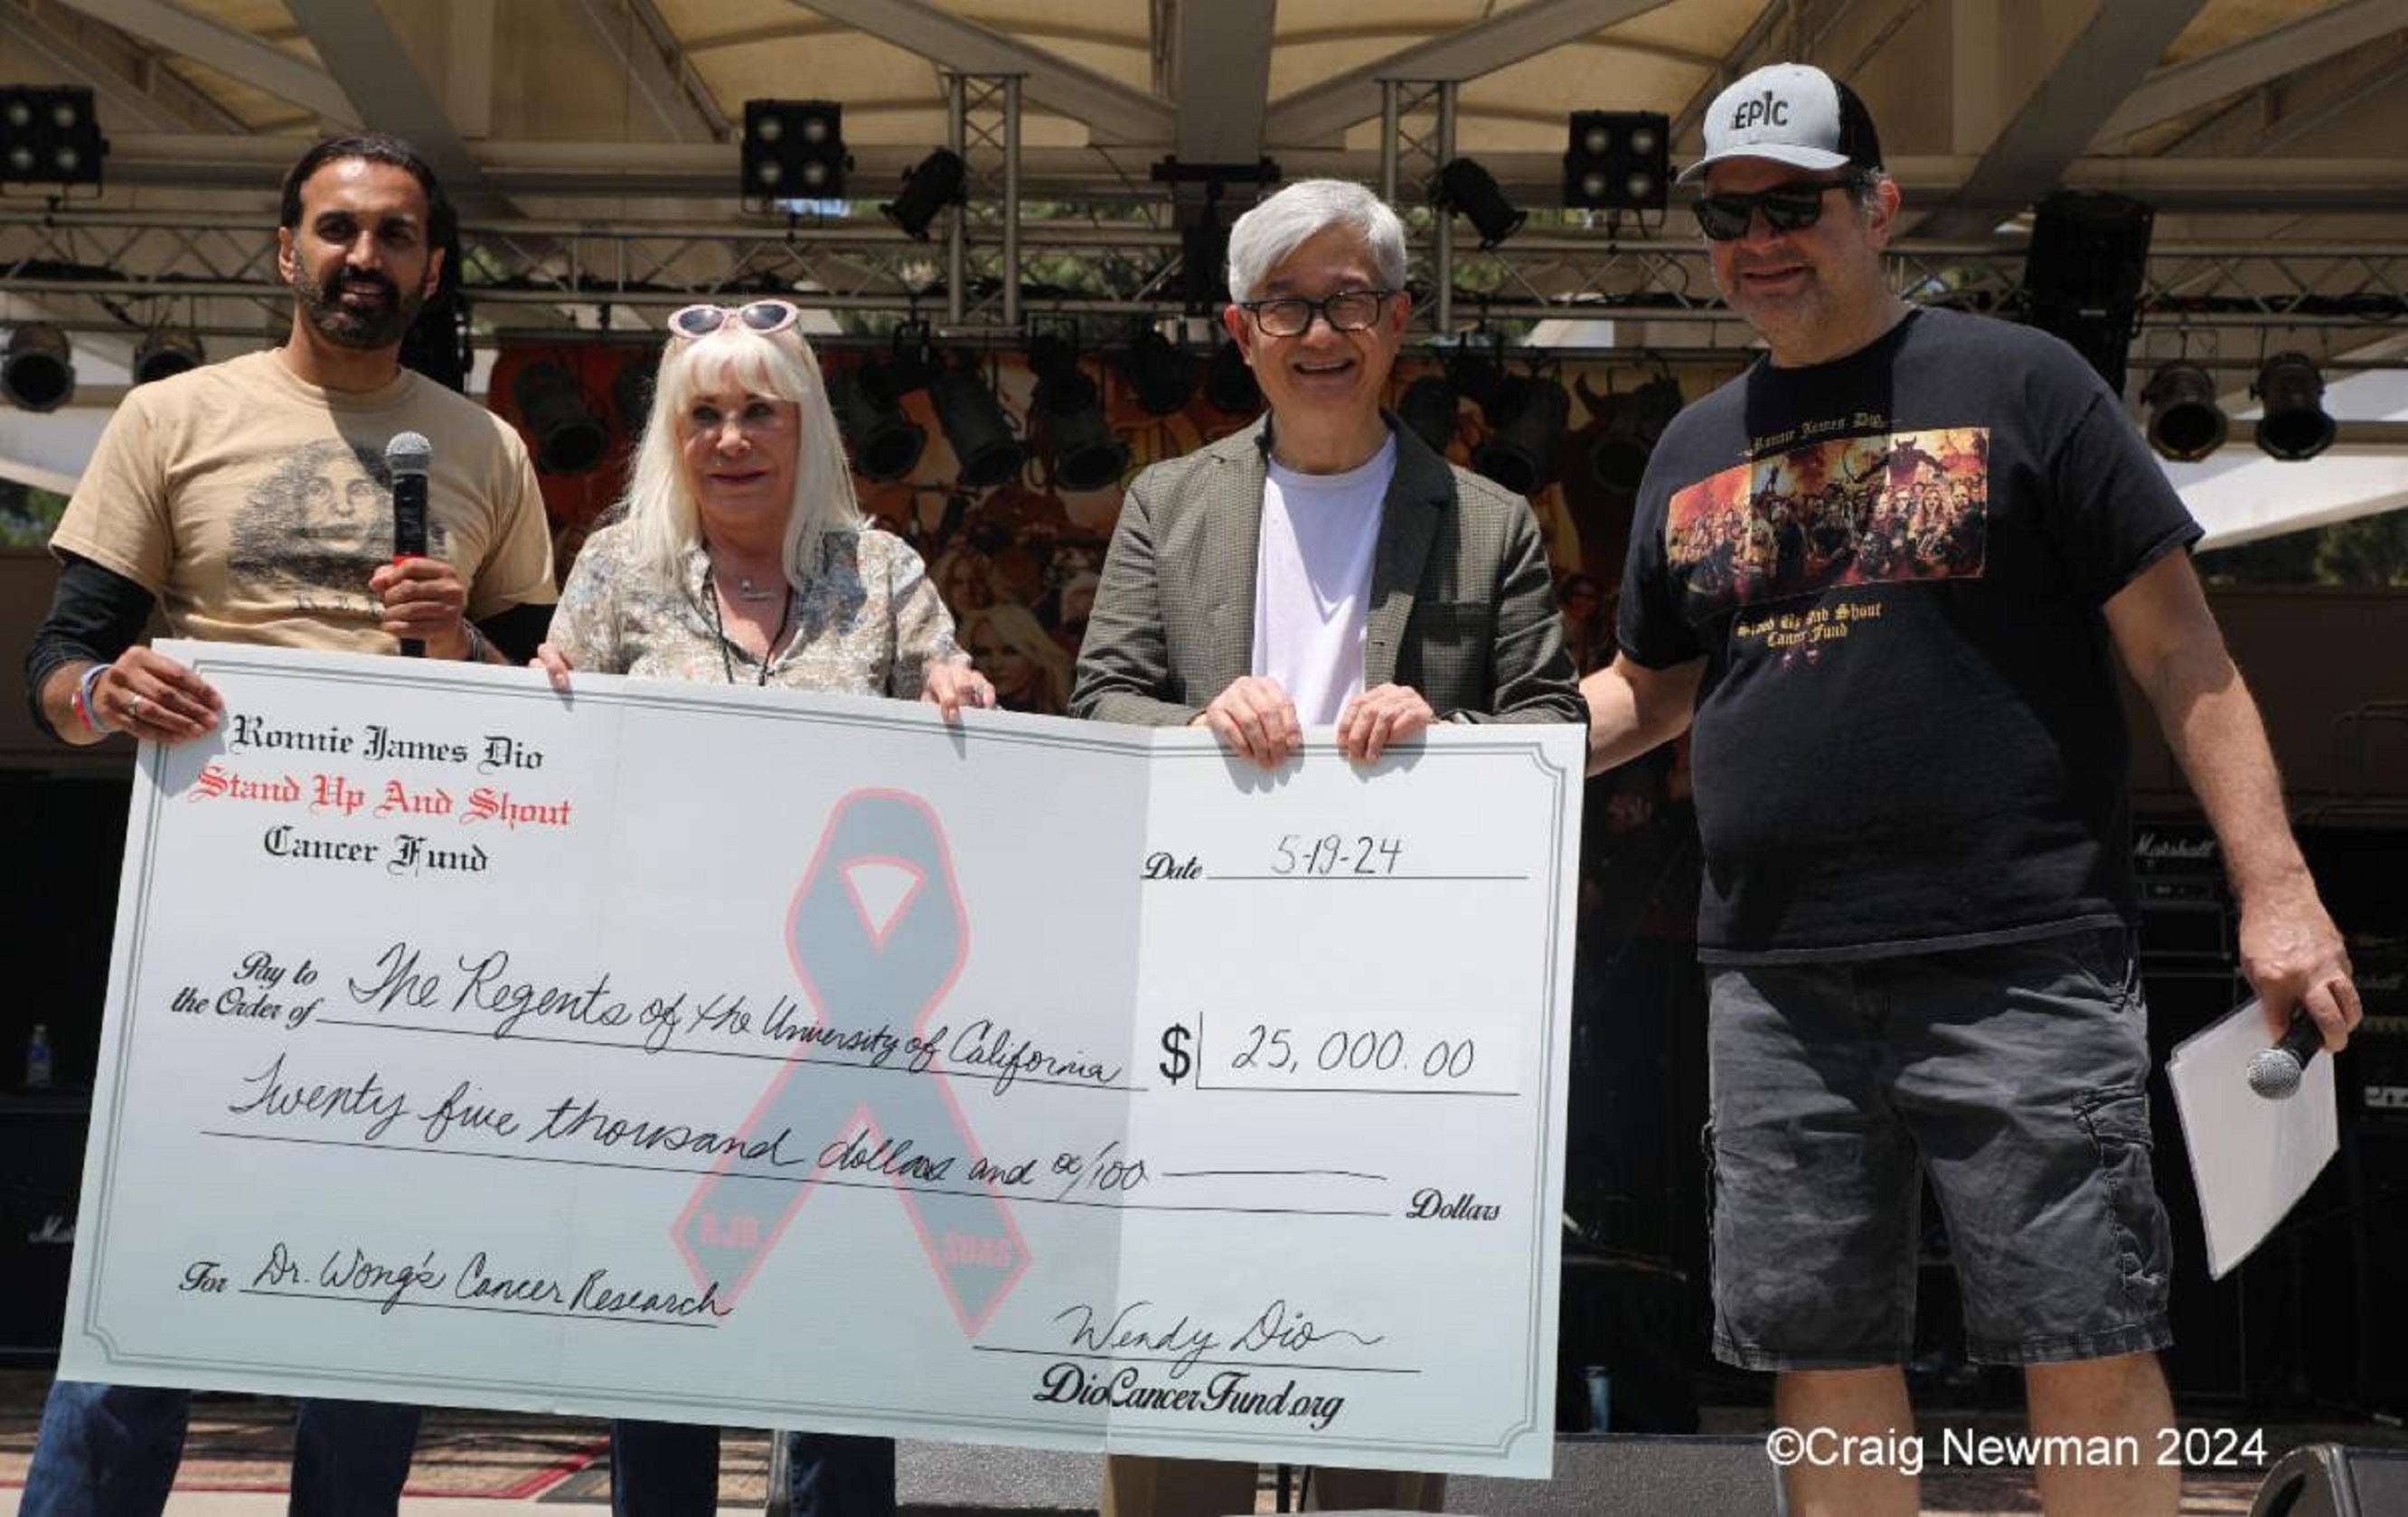 ROCK FOR RONNIE "Year of the Dragon" Concert Event Brings in $80,000 for Dio Cancer Fund